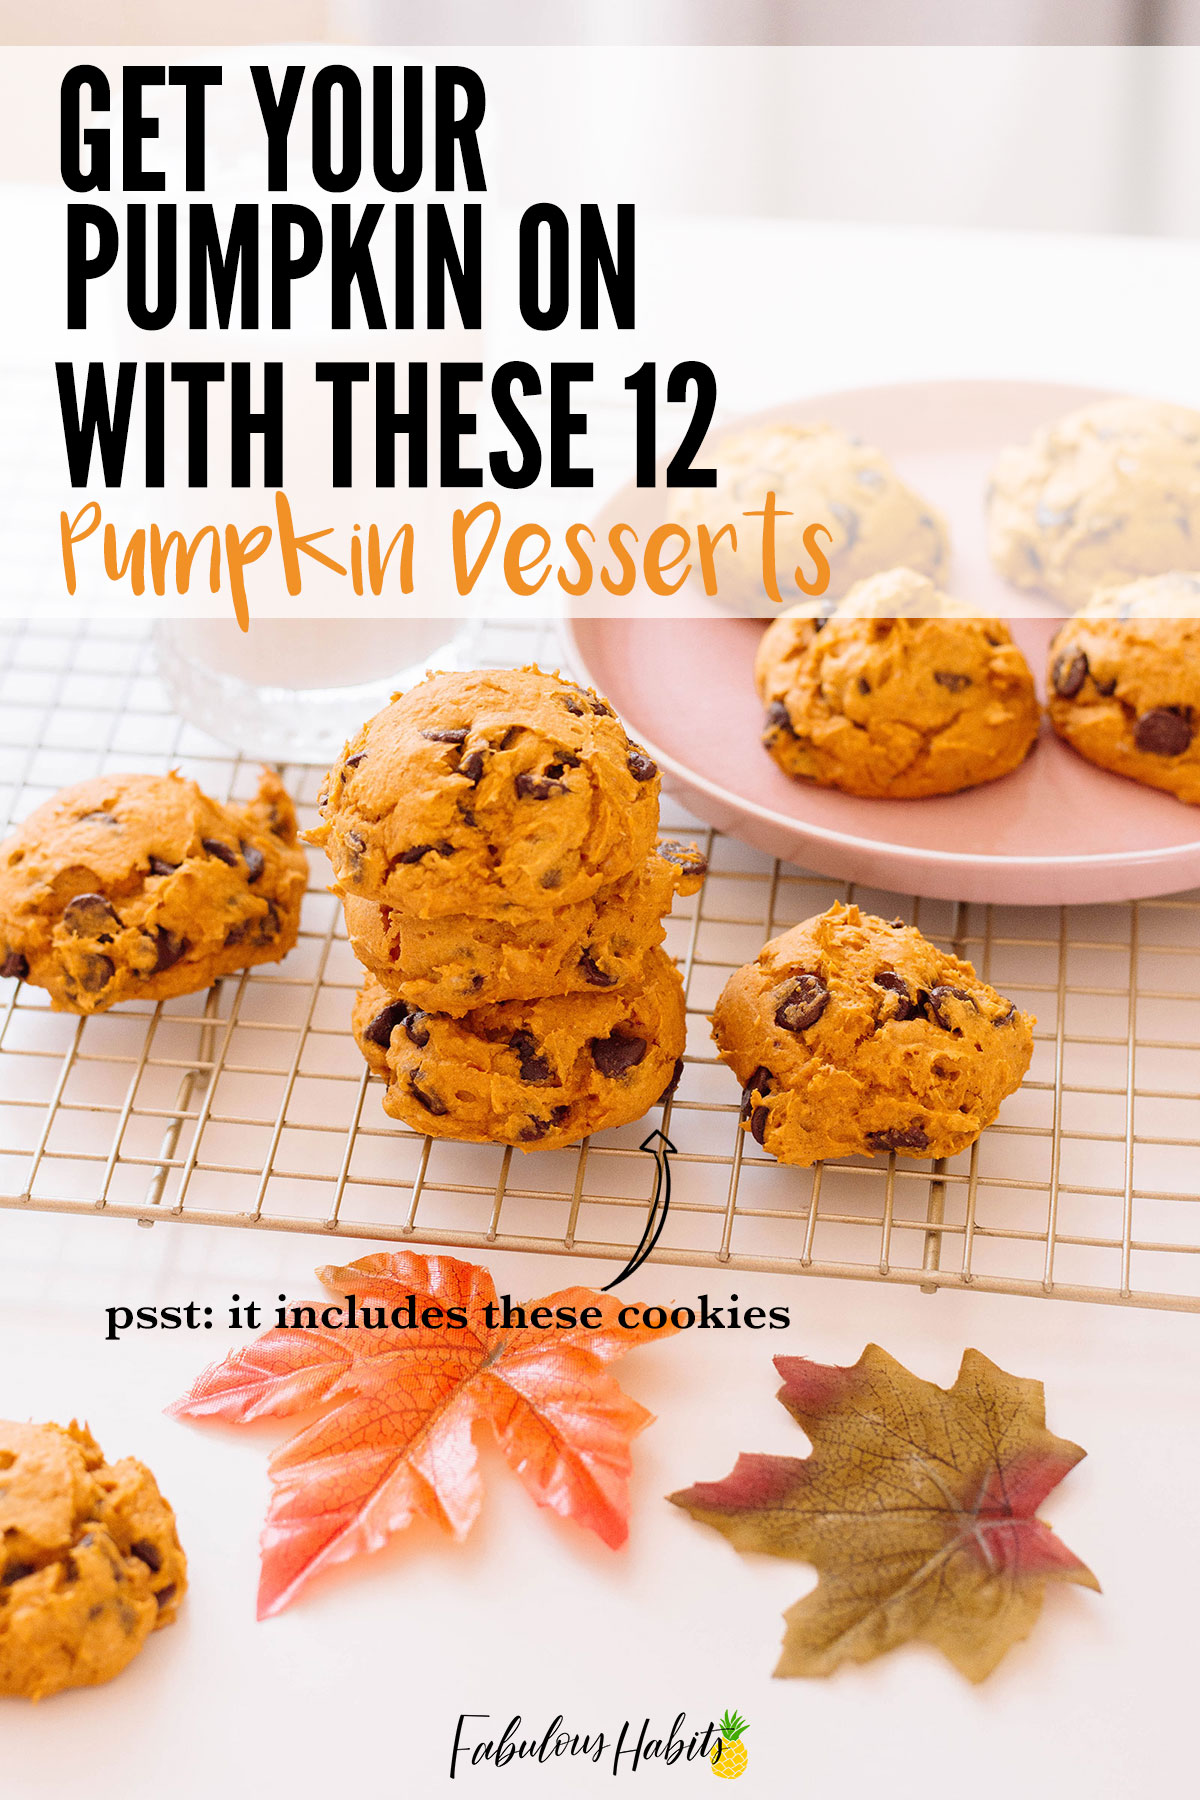 Celebrate fall with these 12 pumpkin desserts - perfect for any autumn spread. Grab your drool bibs, because this is gonna be a good one! #pumpkindesserts